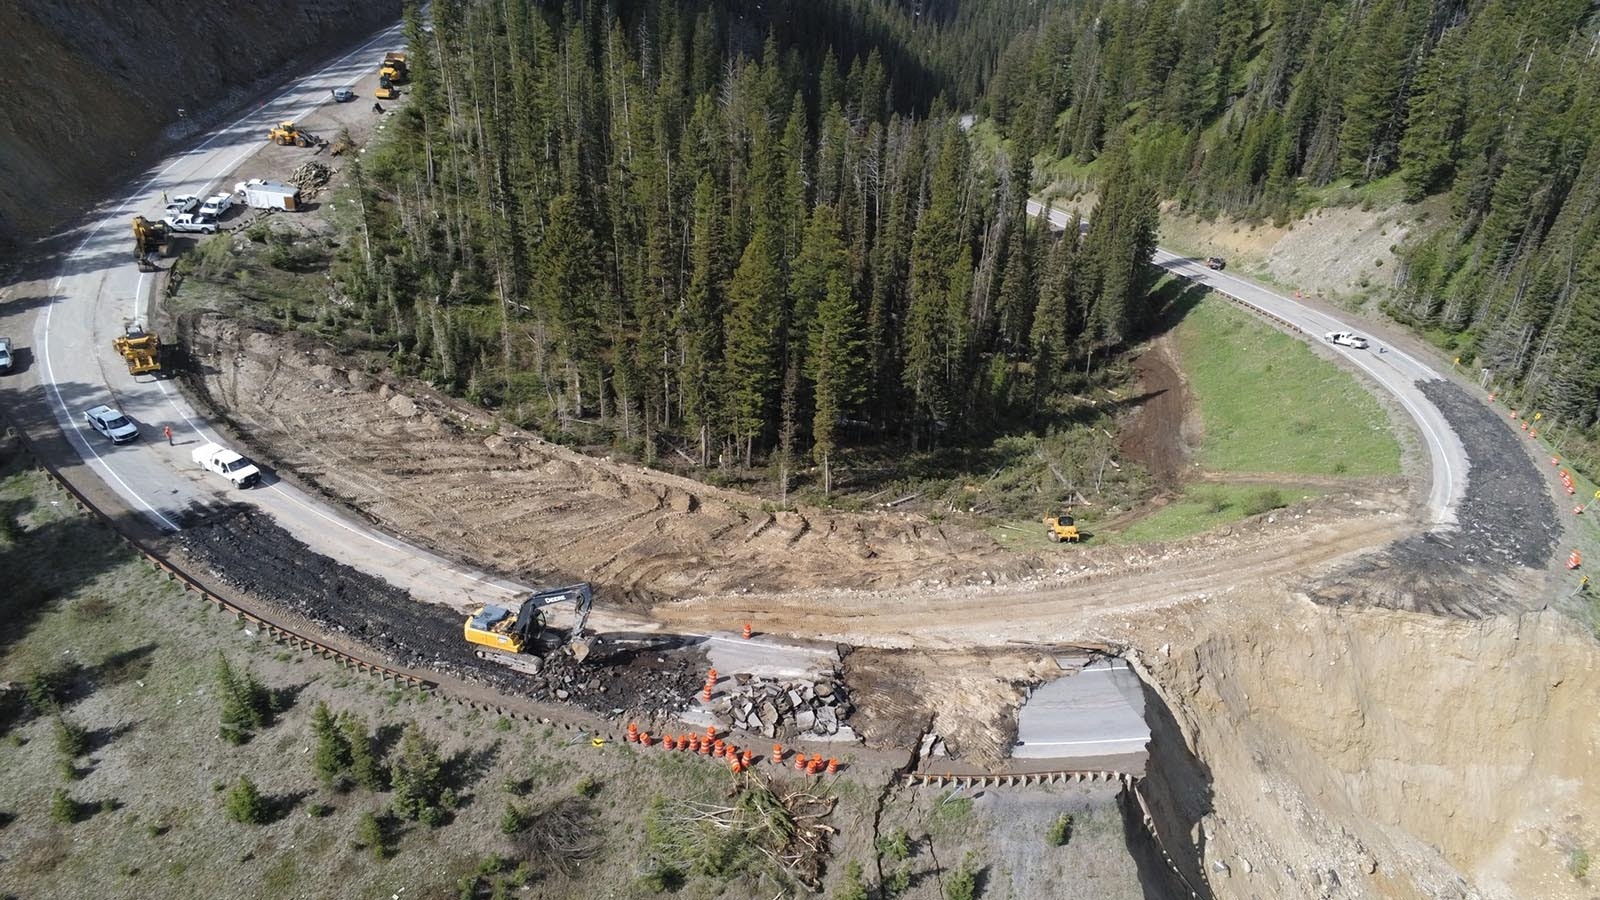 Work is going quickly at the S curve that failed on Teton Pass over the weekend.